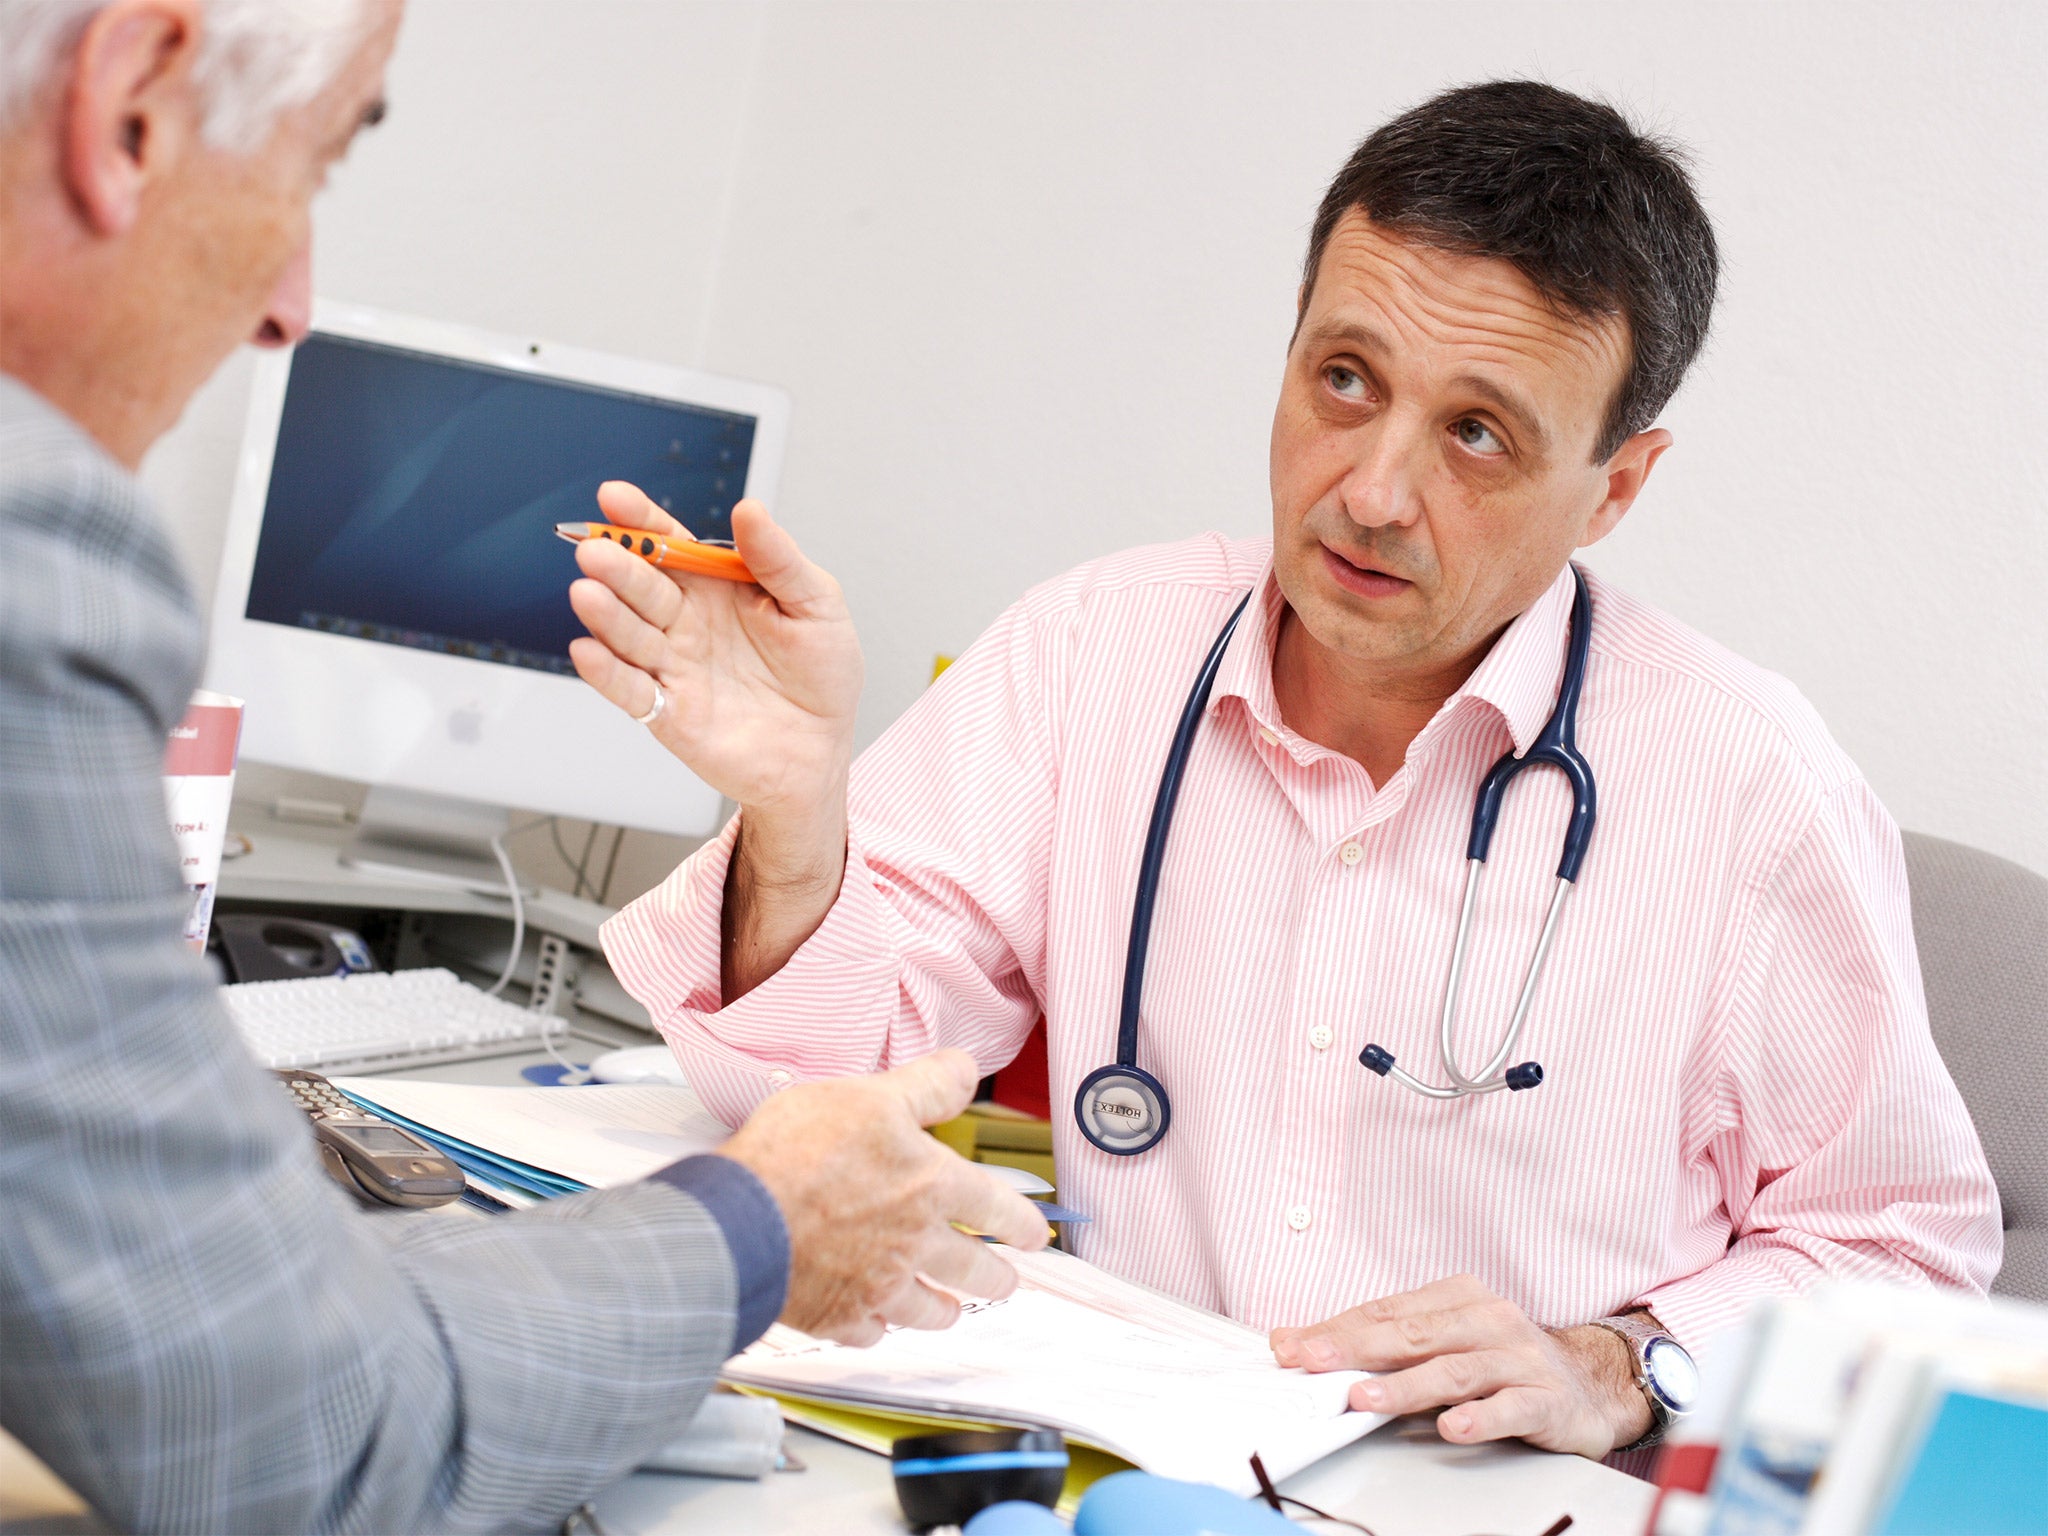 The number of GP practices with 10 or more doctors has grown by 75 per cent